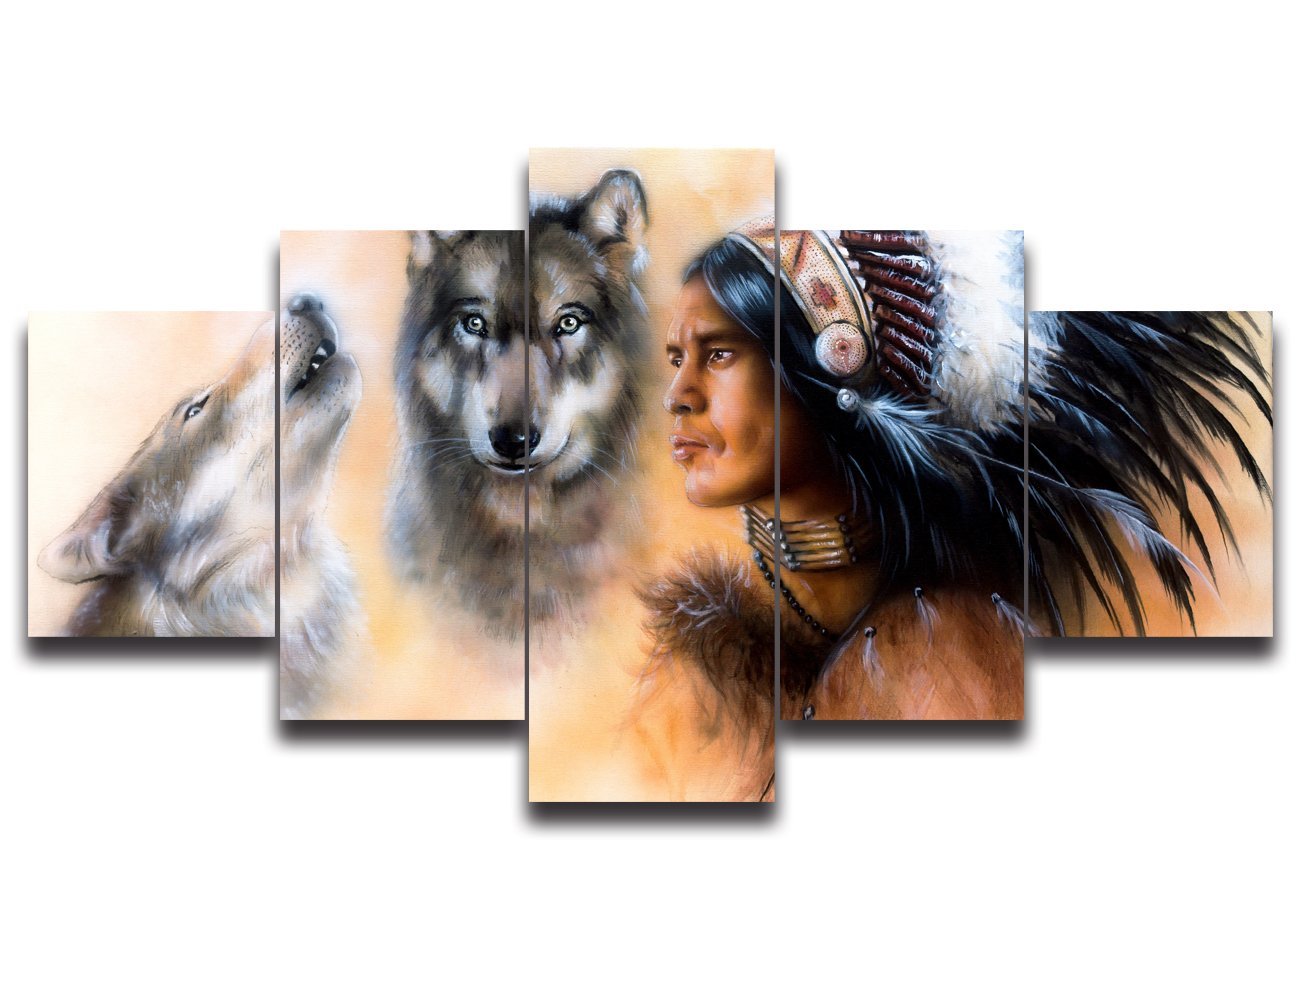 Indian Man In Ethnic Feather With Wolves Modern Landscape Posters Drop shipping